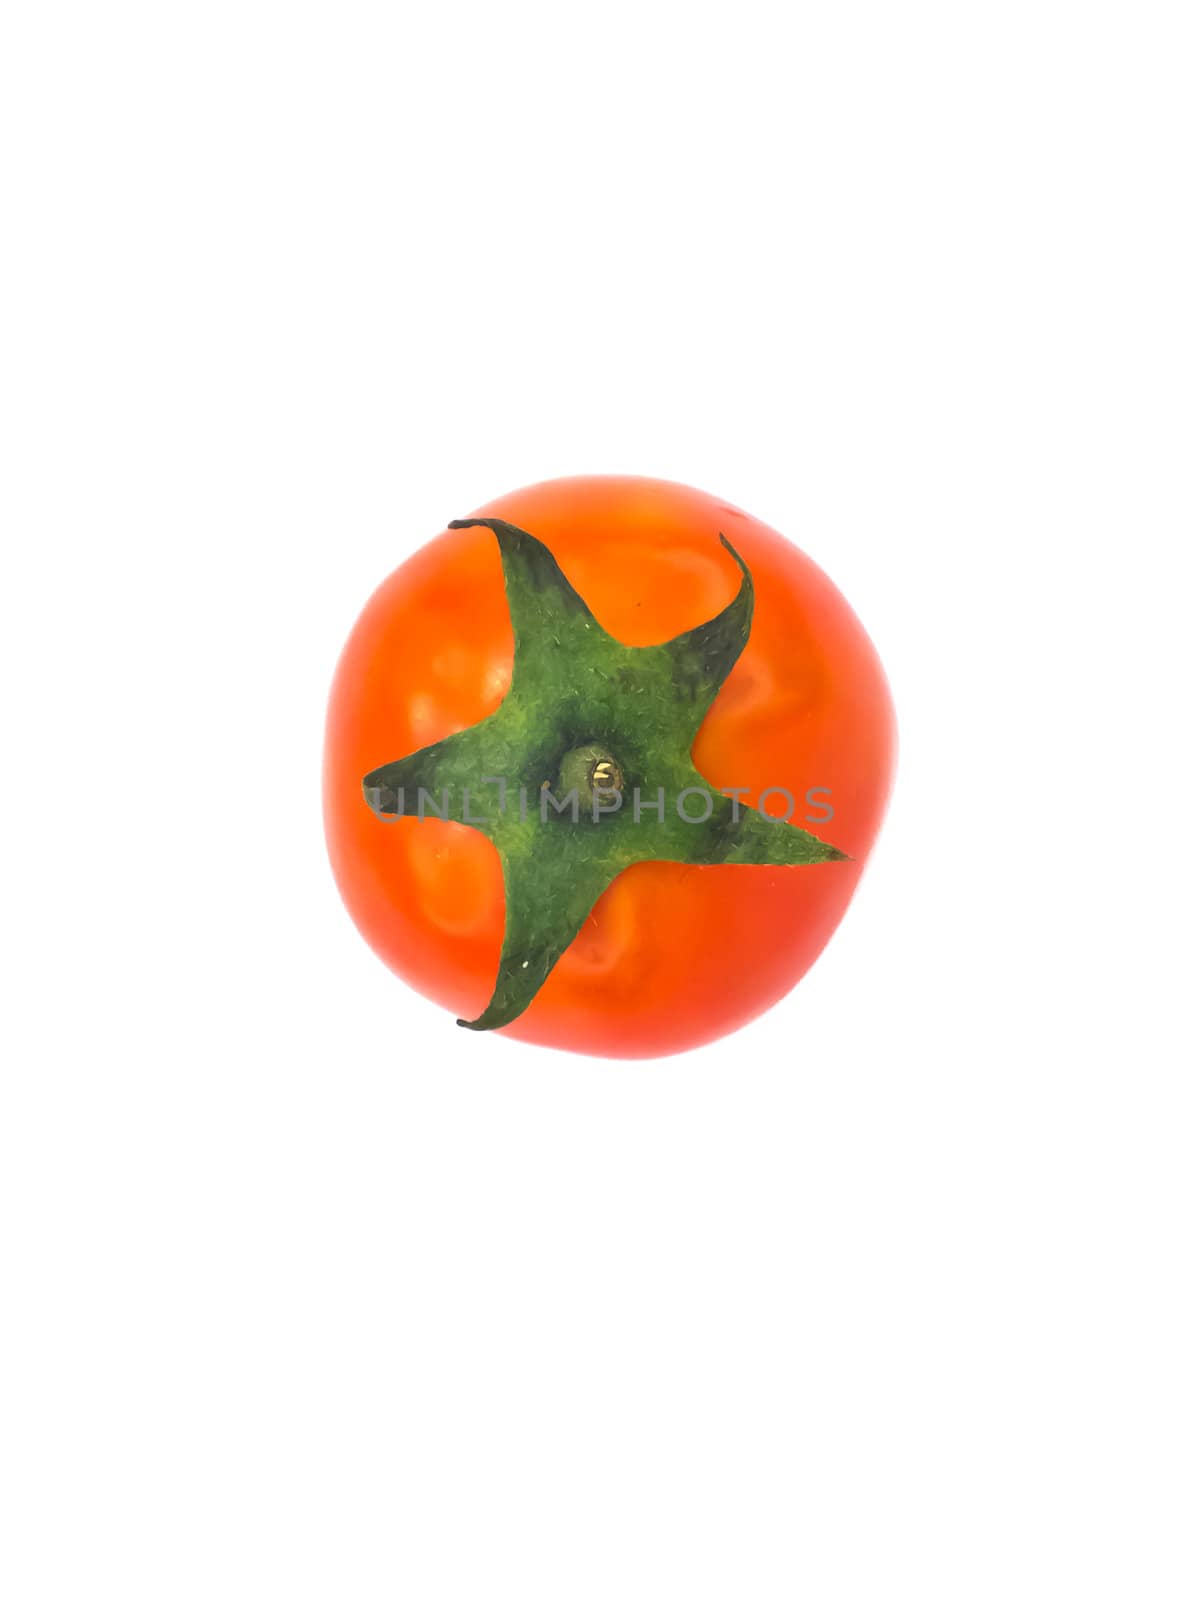 This is a bird eye view of tomato on white background